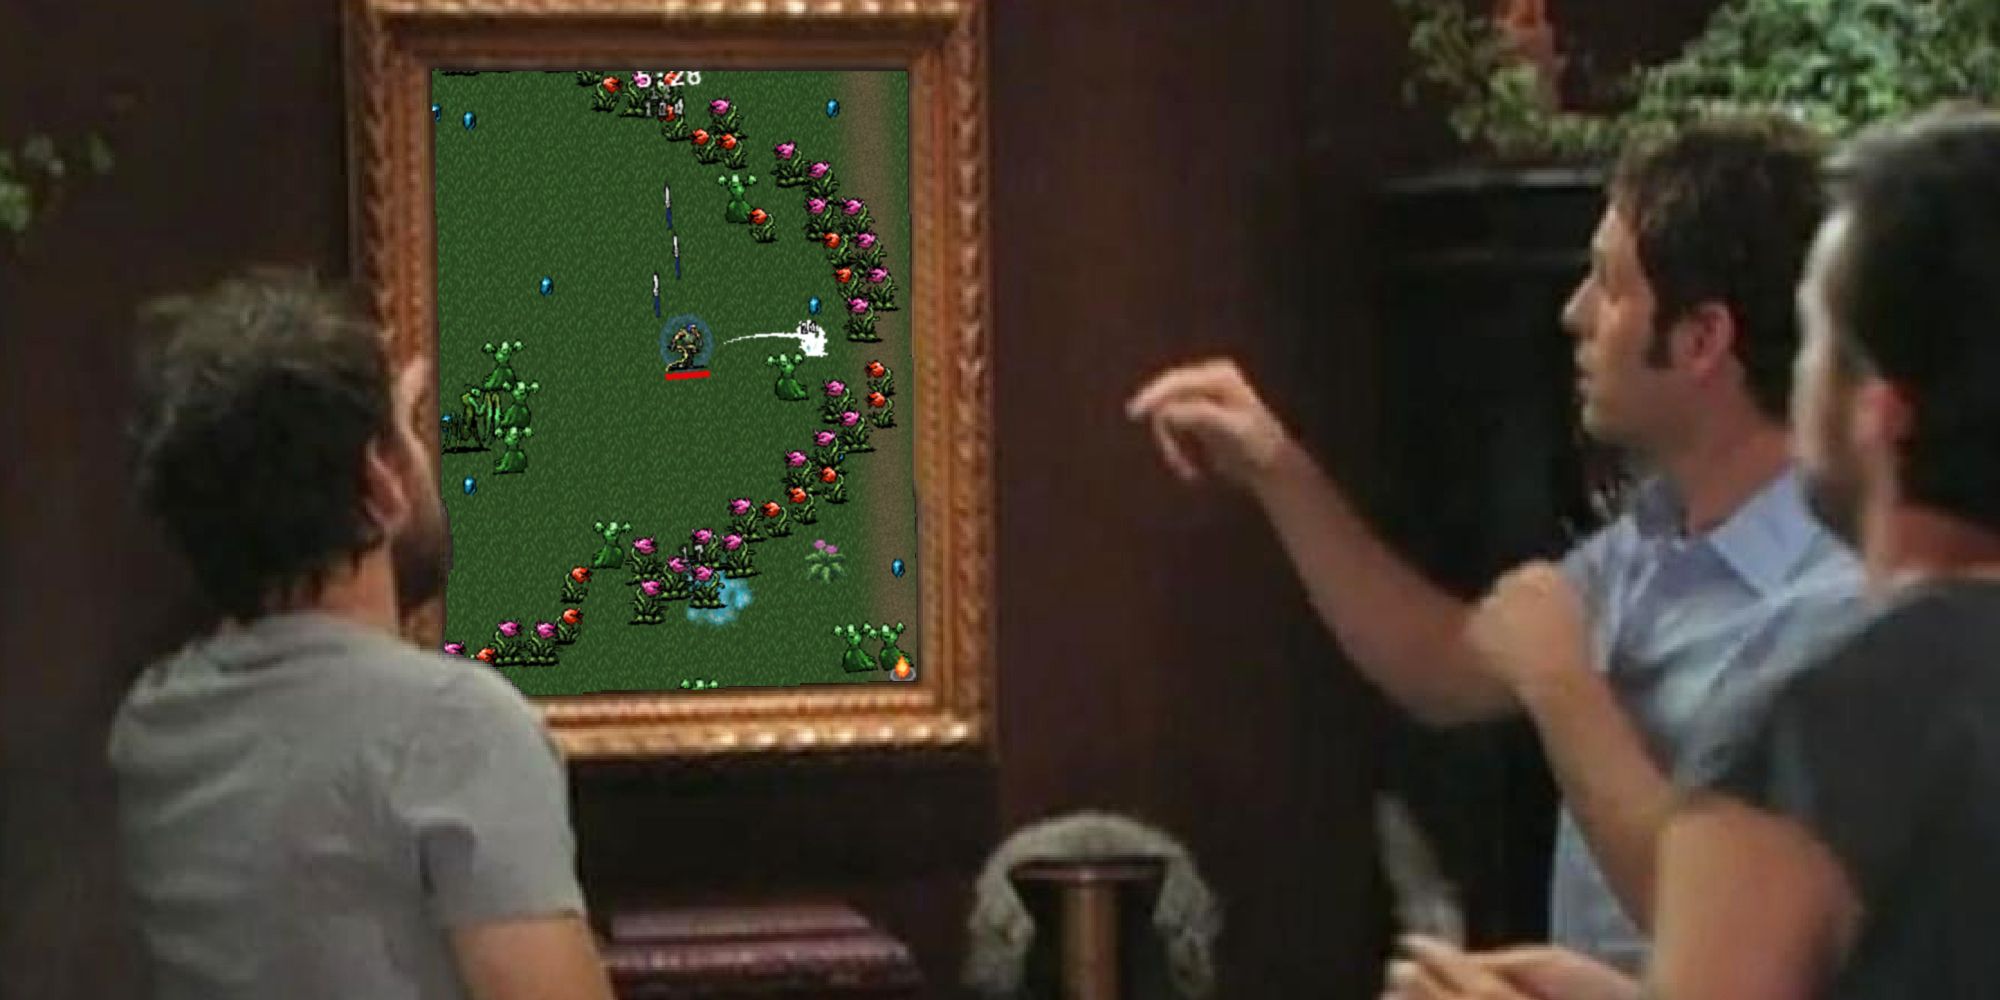 Charlie, Dennis, and Mac from It's Always Sunny pointing at a framed image of the flower enemies from Vampire Survivors.